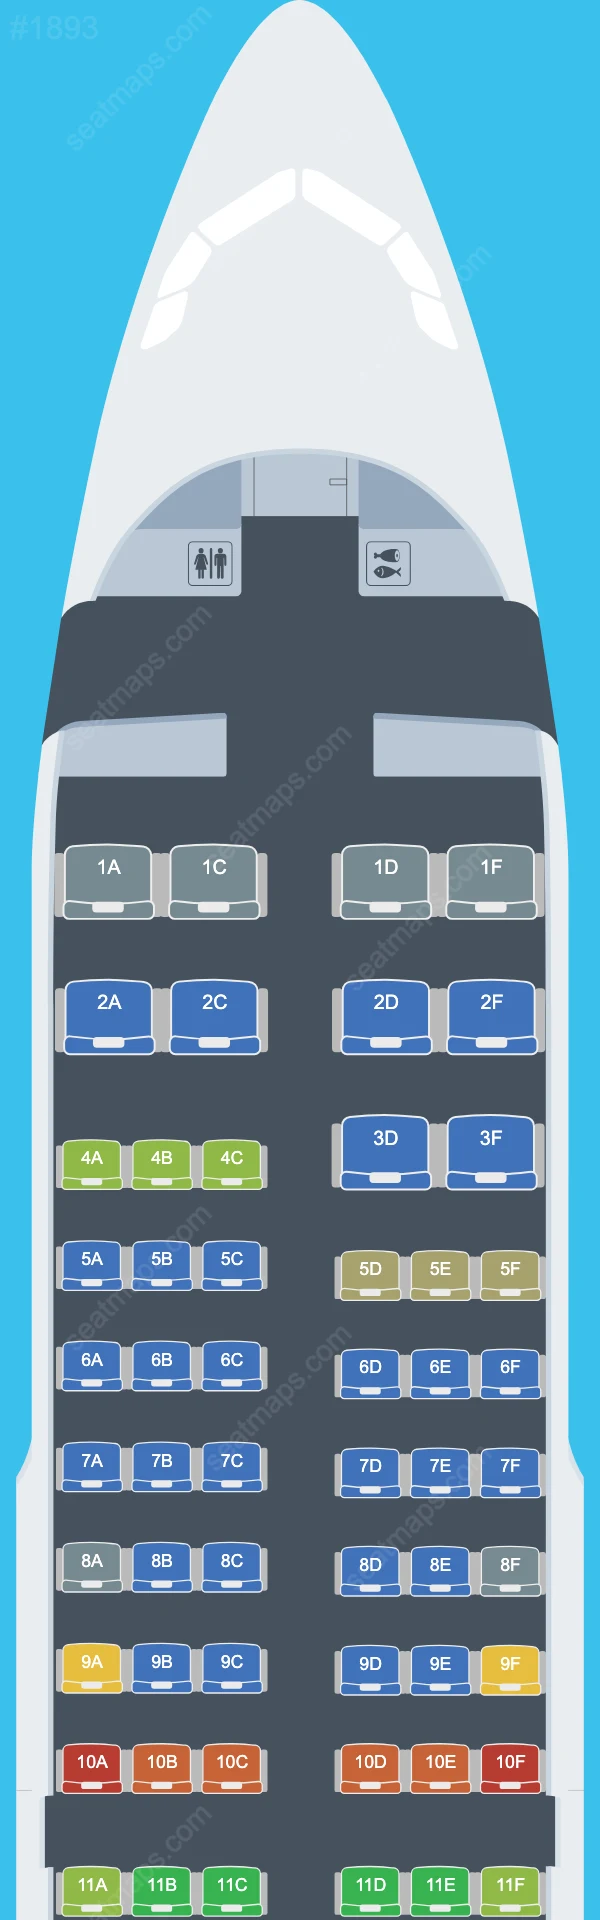 Spirit Airlines Airbus A319-100 seatmap mobile preview